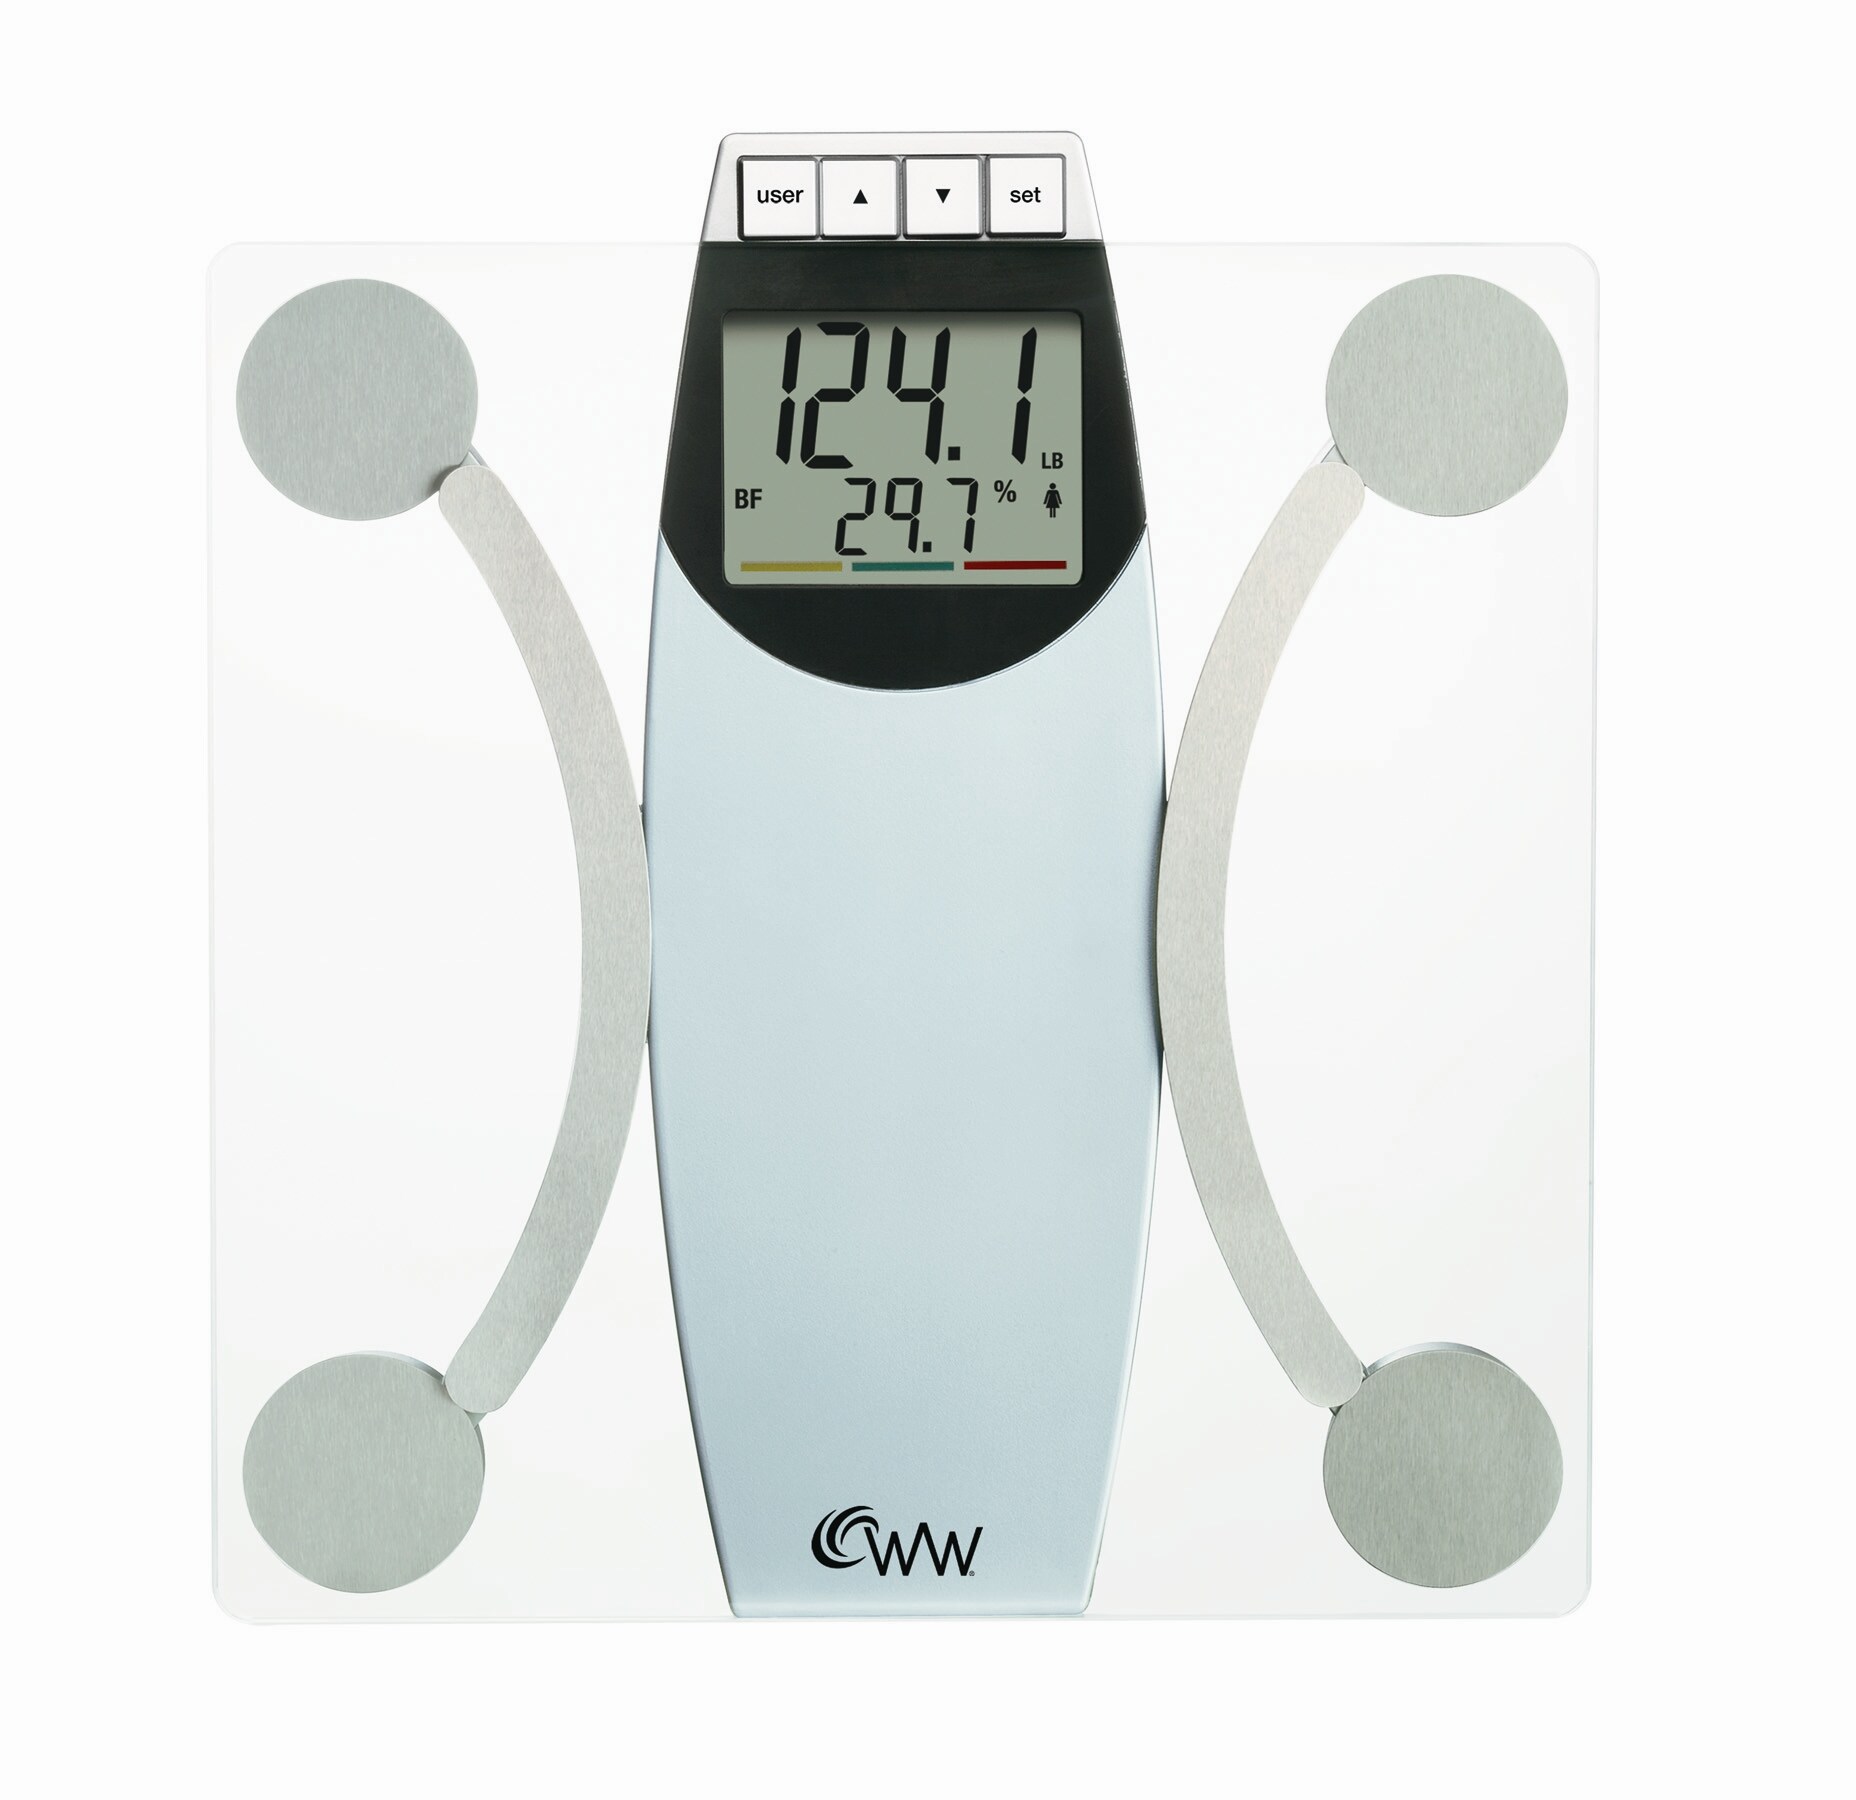 Weight Watchers 380 lbs. Digital Clear Bathroom Scale with Body Fat  Indicator at